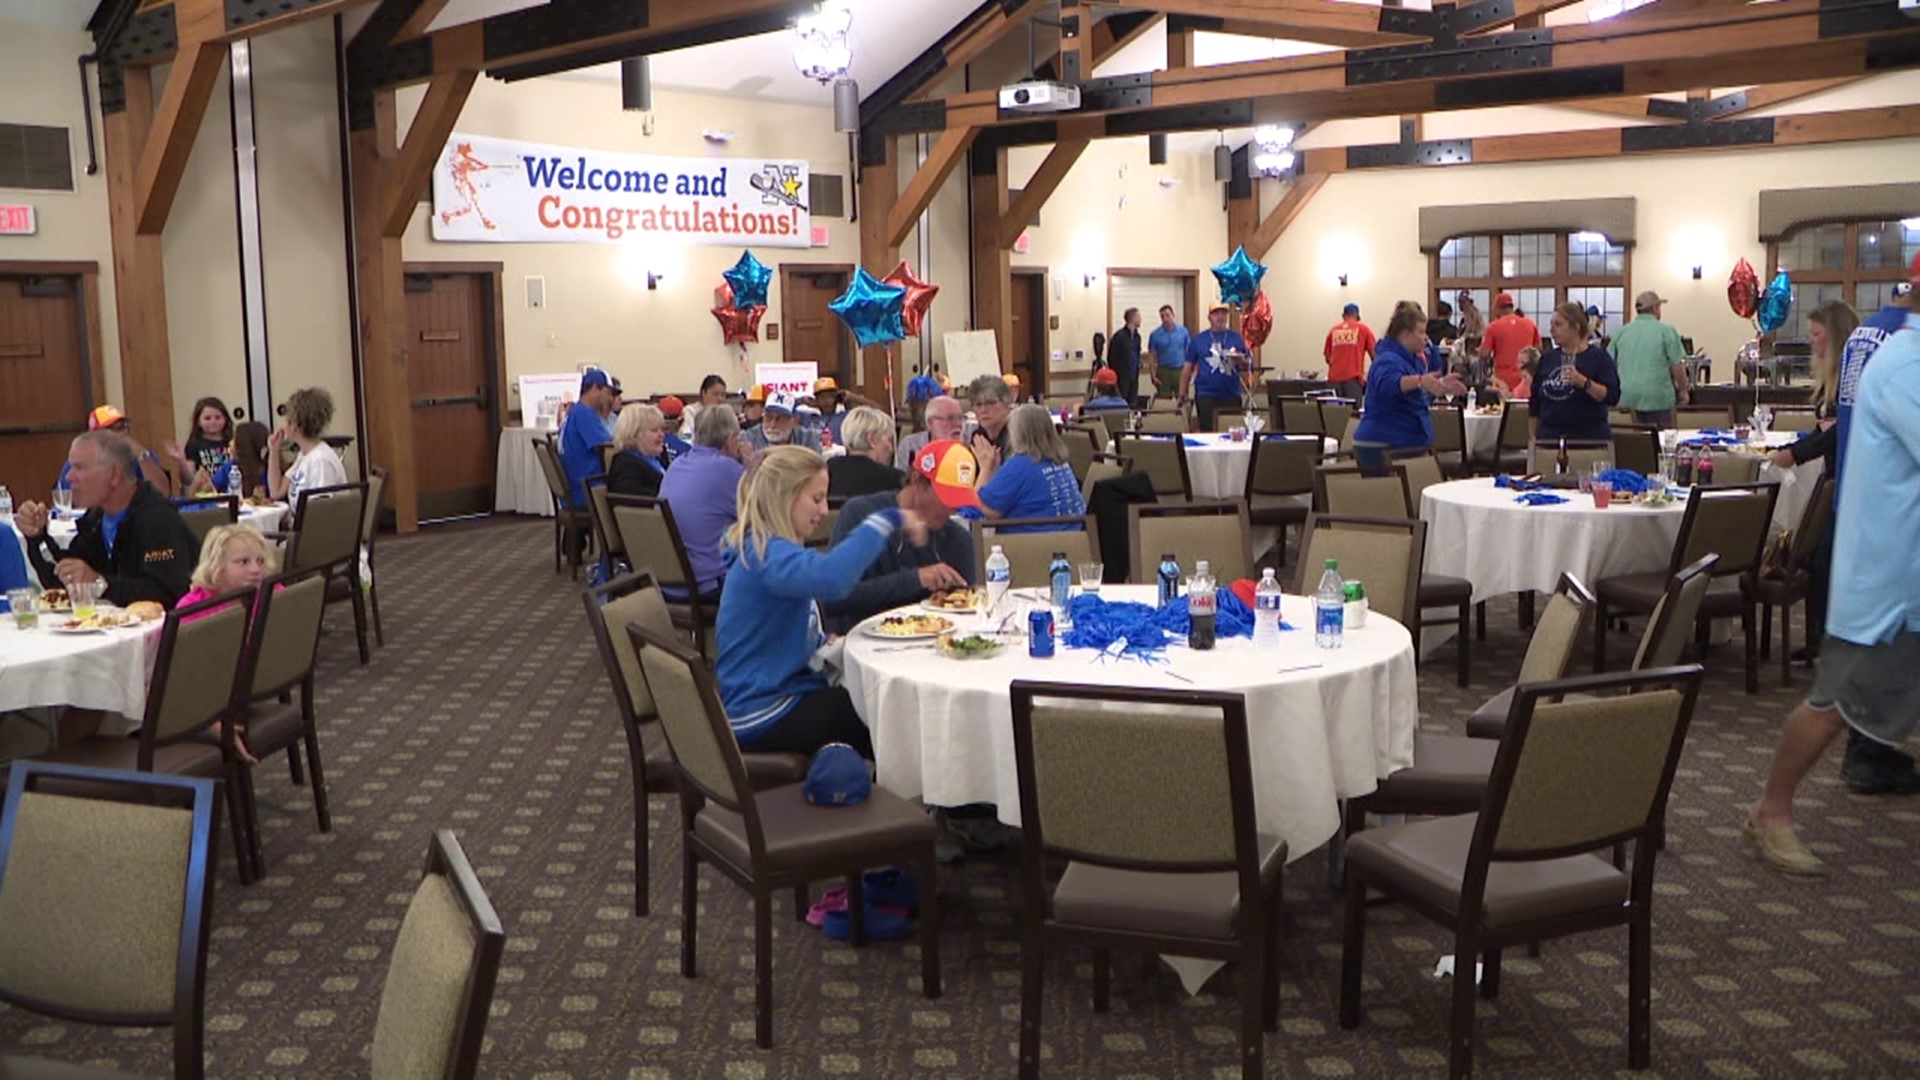 Businesses surrounding the Danville area chipped in to make sure a little league team from Texas had some of the comforts of home.